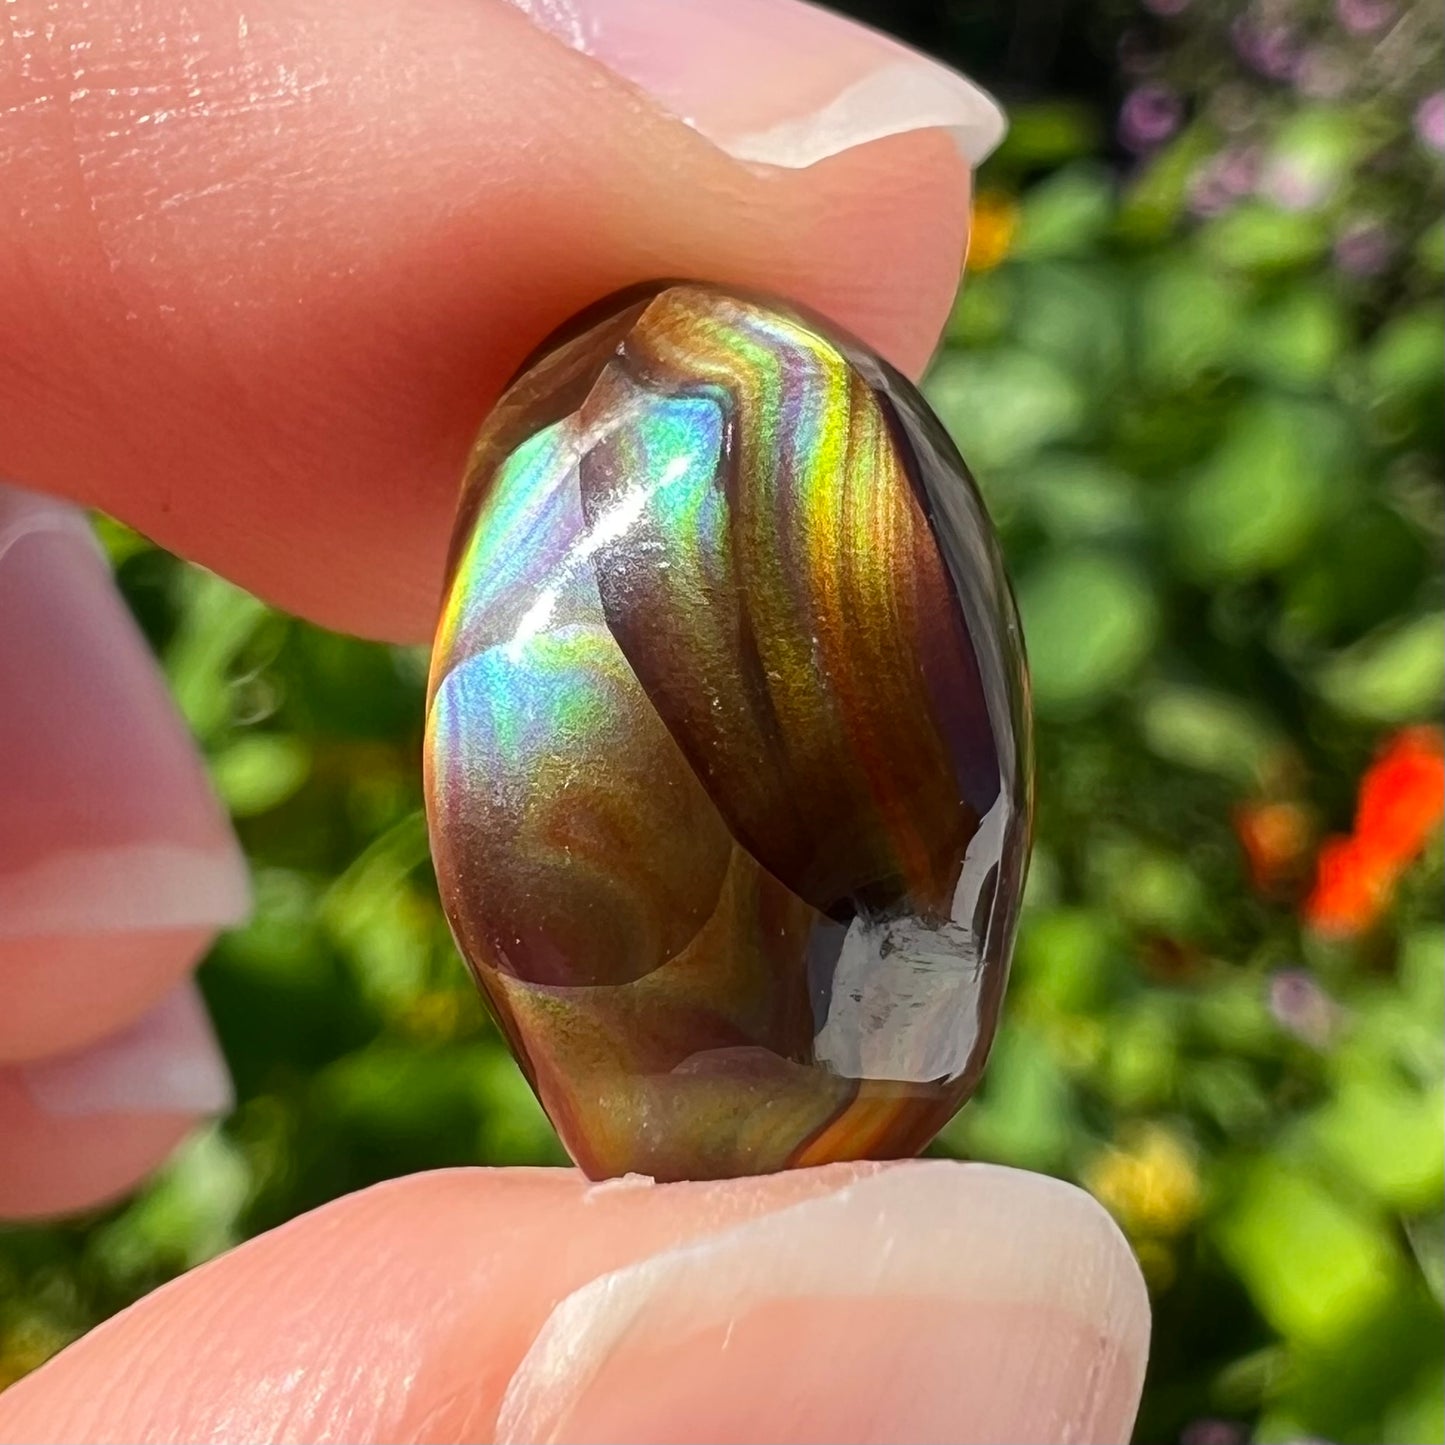 An oval cabochon cut Mexican fire agate stone.  The stone has bright, multicolored iridescent banding.